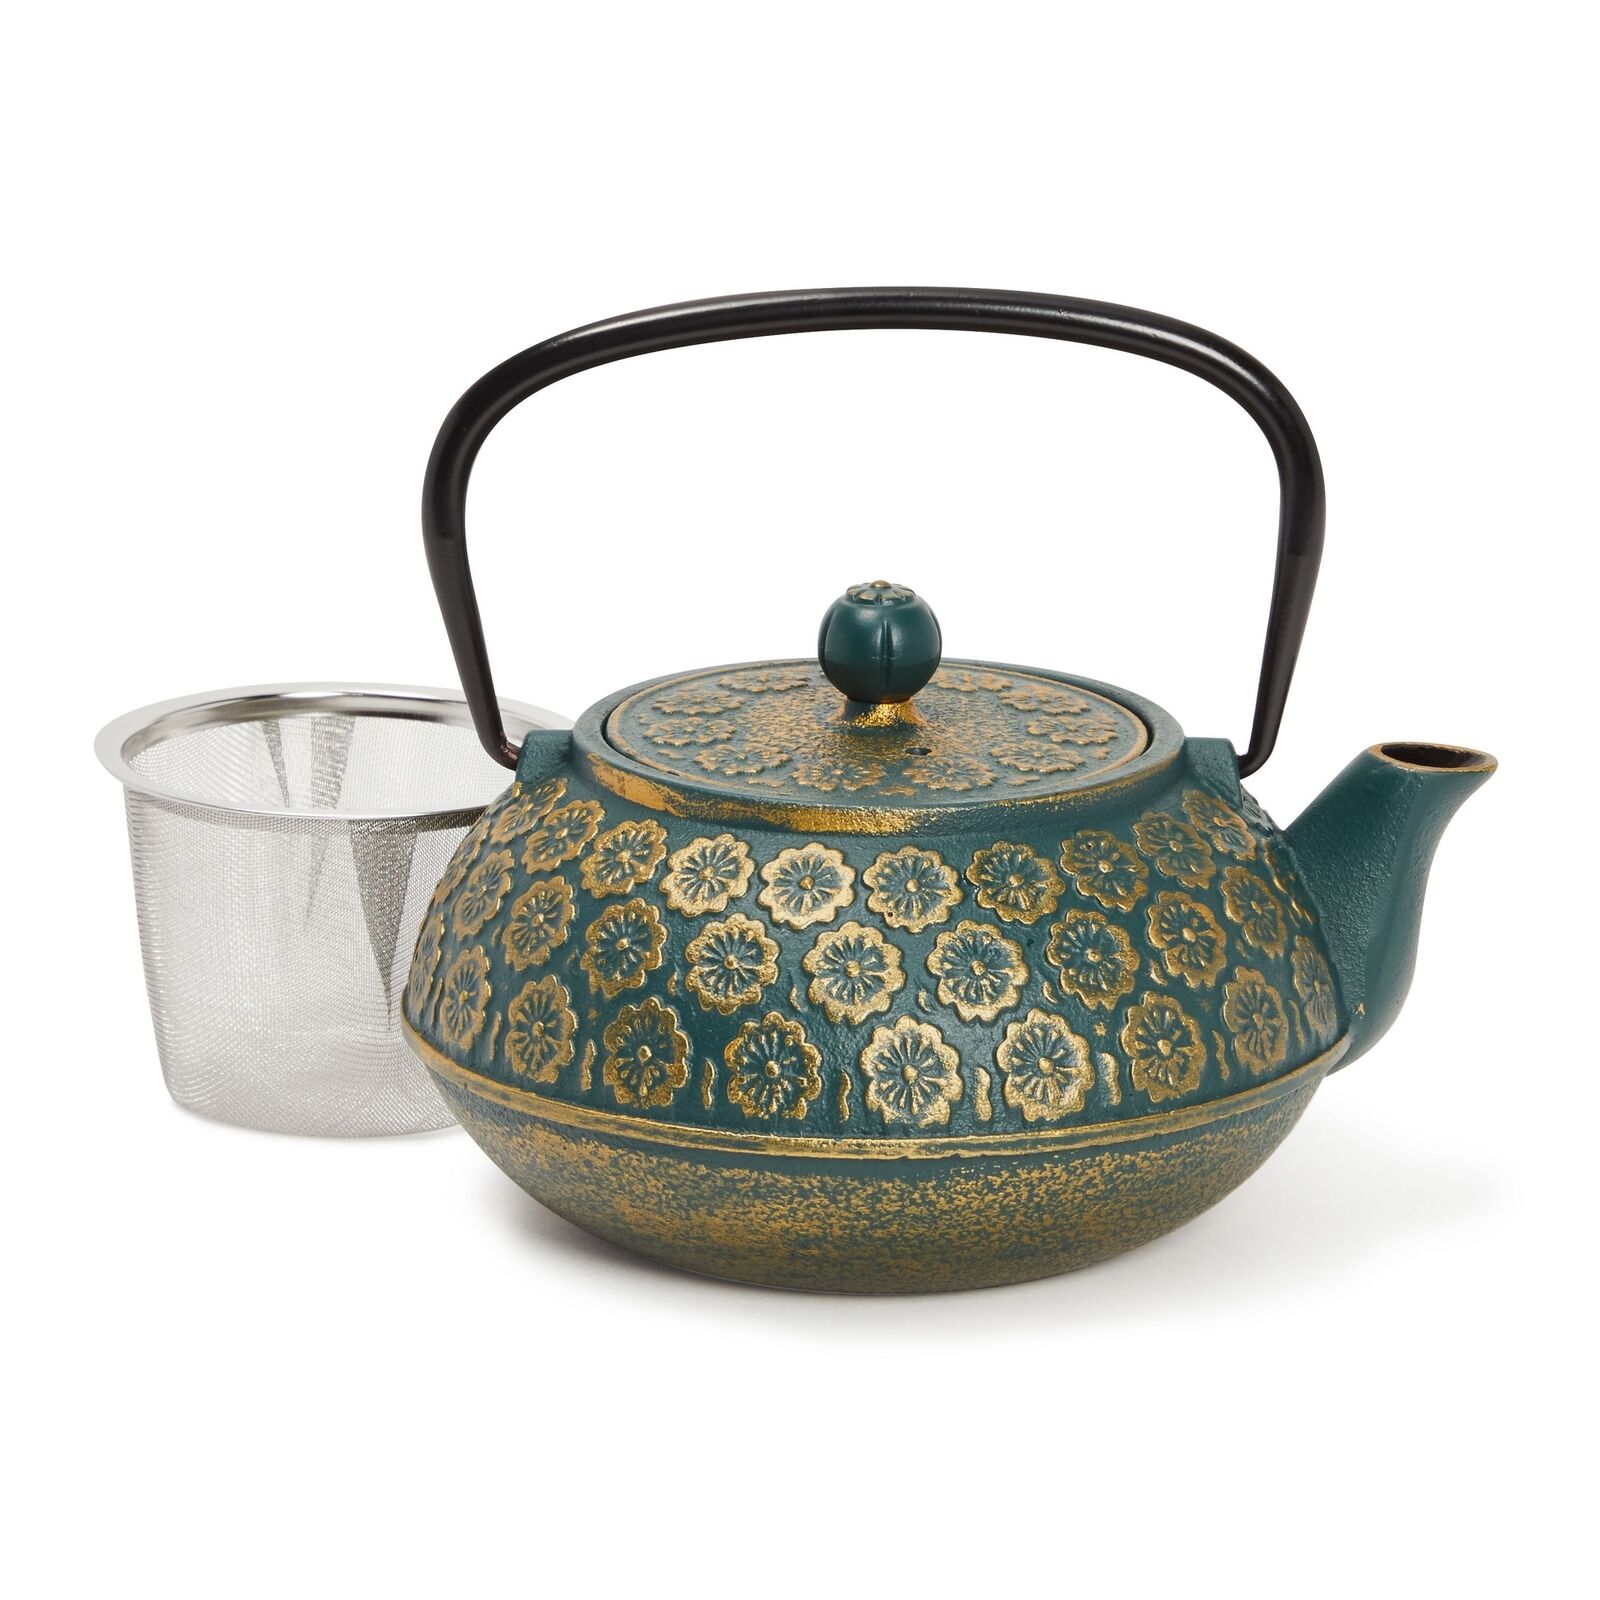 Classic Cast Iron Tea Pot with Kettle Stainless Steel Infuser 34oz, Green Floral